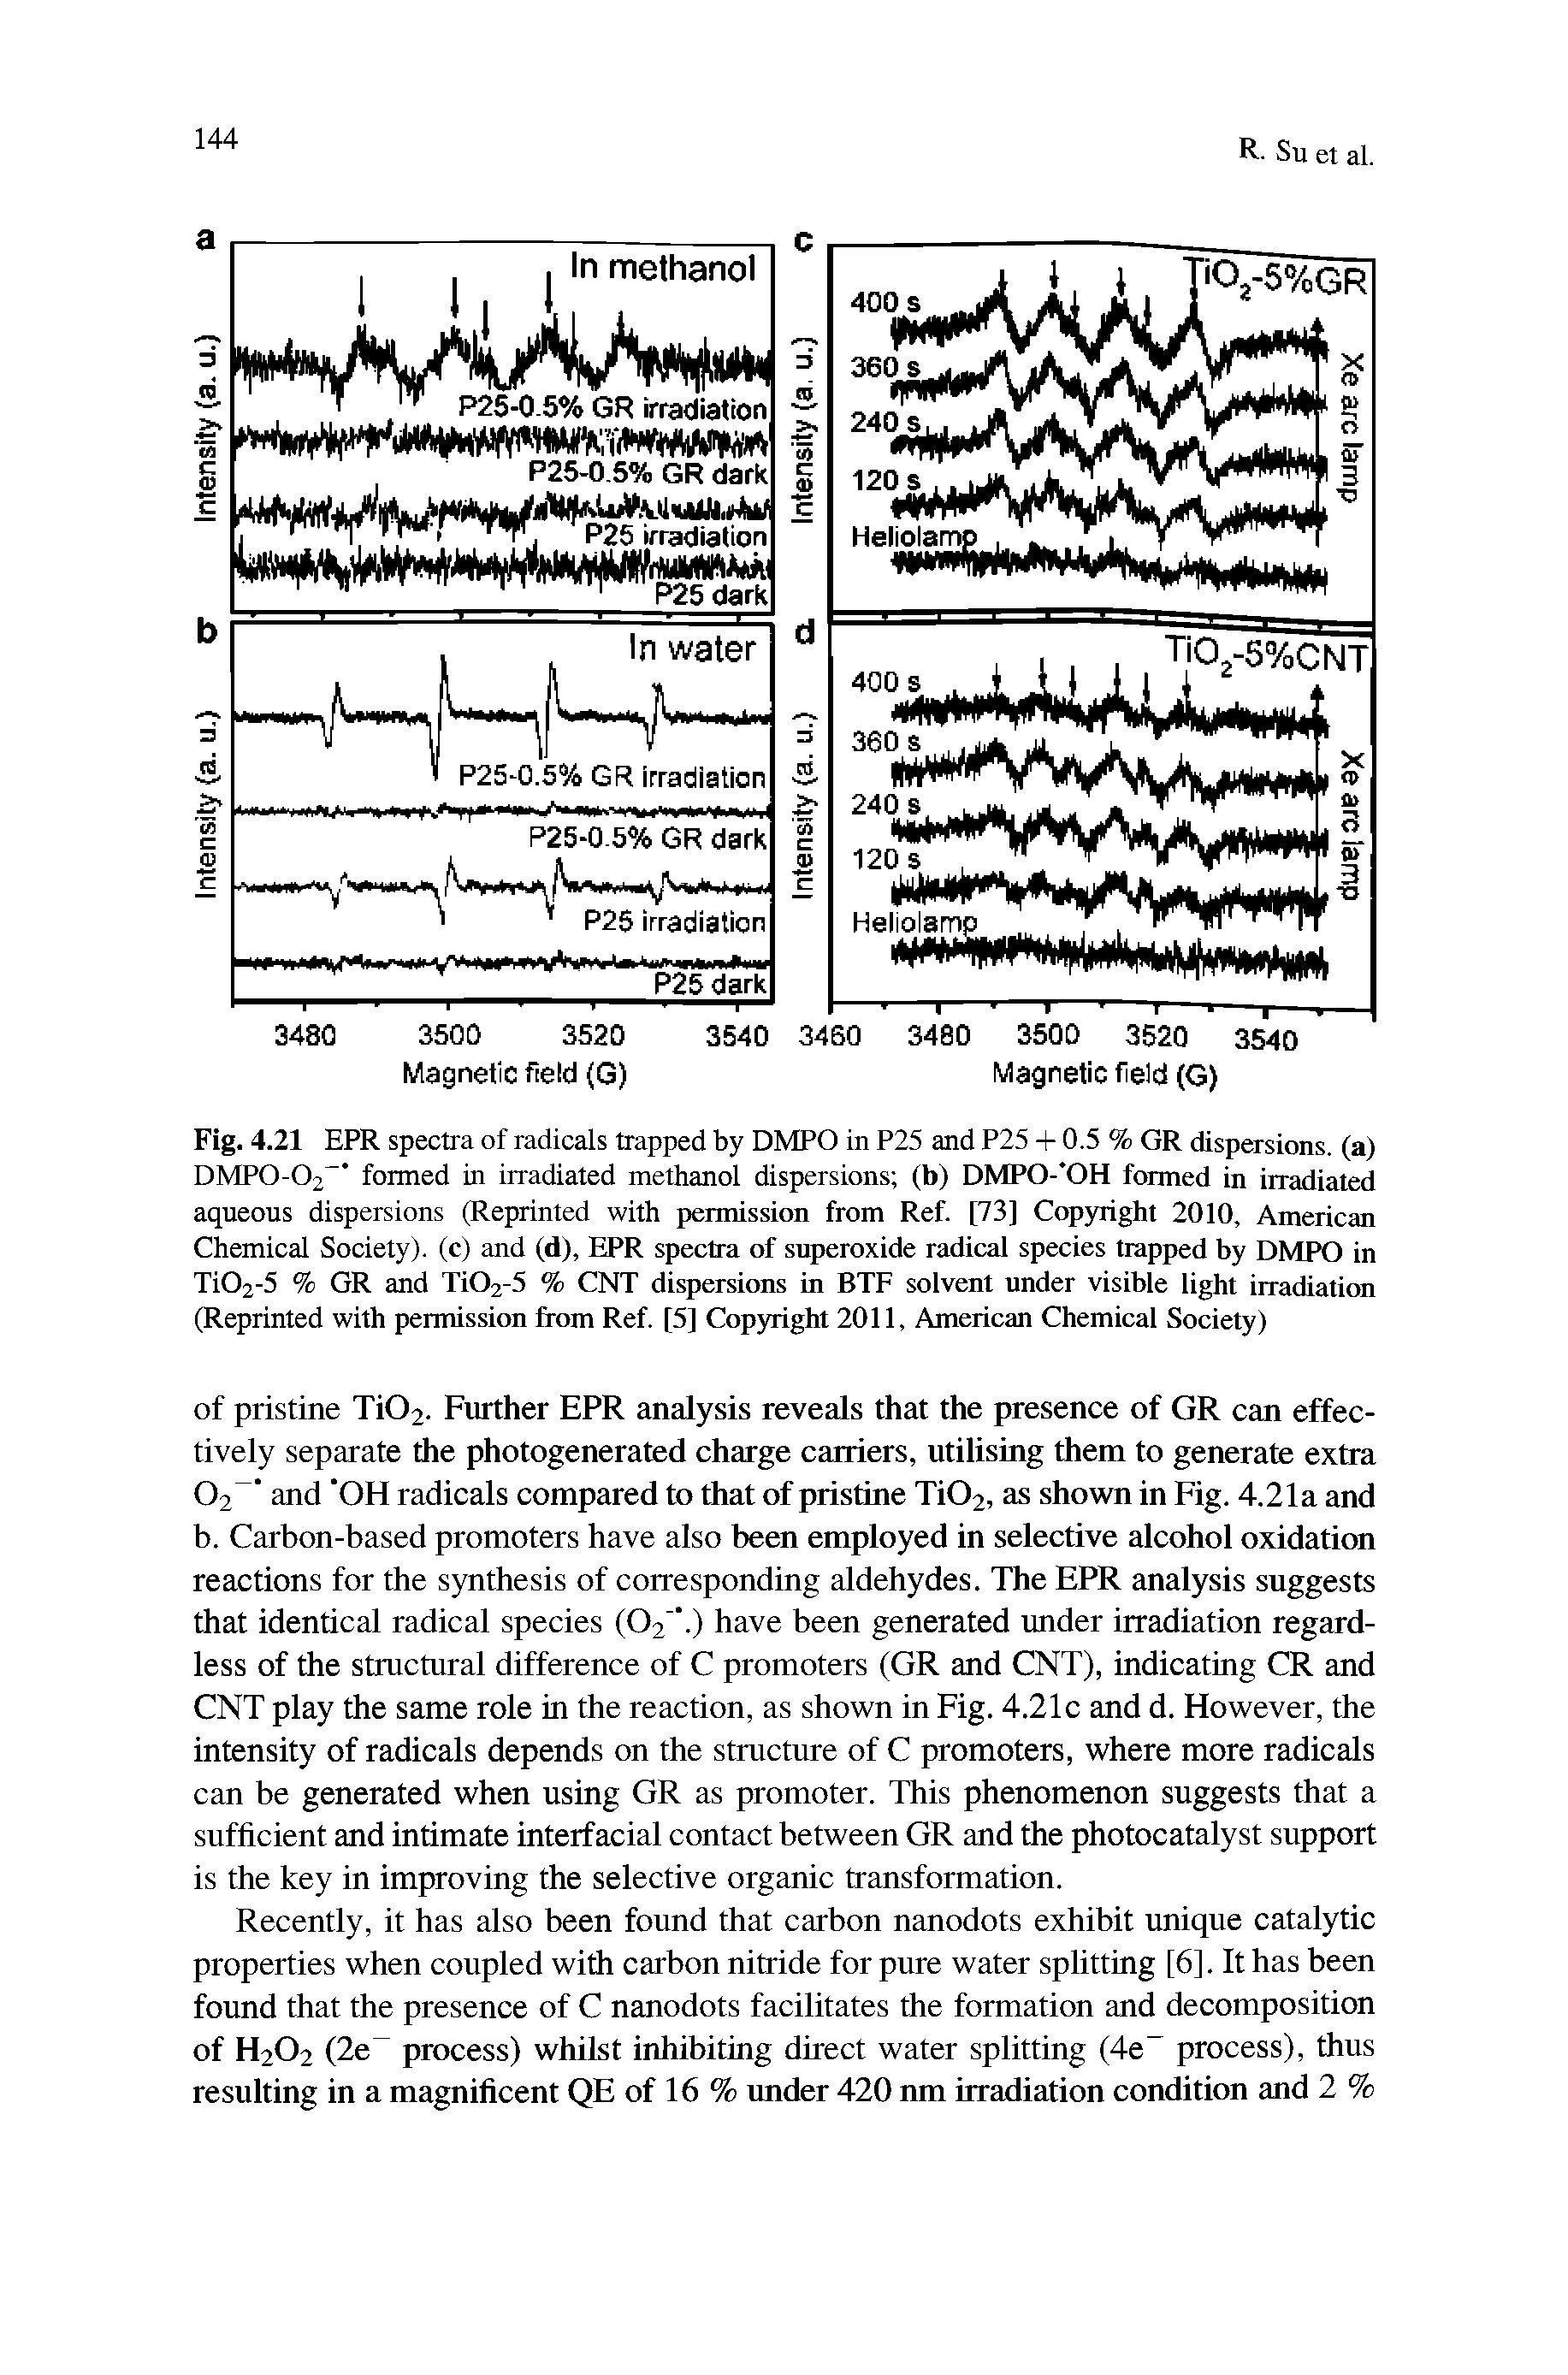 Fig. 4.21 EPR spectra of radicals trapped by DMPO in P25 and P25 + 0.5 % GR dispersions, (a) DMPO-O2 formed in irradiated methanol dispersions (b) DMPO- OH framed in irradiated aqueous dispersions (Reprinted with permission from Ref. [73] Copyright 2010, American Chemical Society), (c) and (d), EPR spectra of superoxide radical species trapped by DMPO in Ti02-5 % GR and Ti02-5 % CNT dispersions in BTF solvent under visible light irradiation (Reprinted with permission from Ref. [5] Copyright 2011, American Chemical Society)...